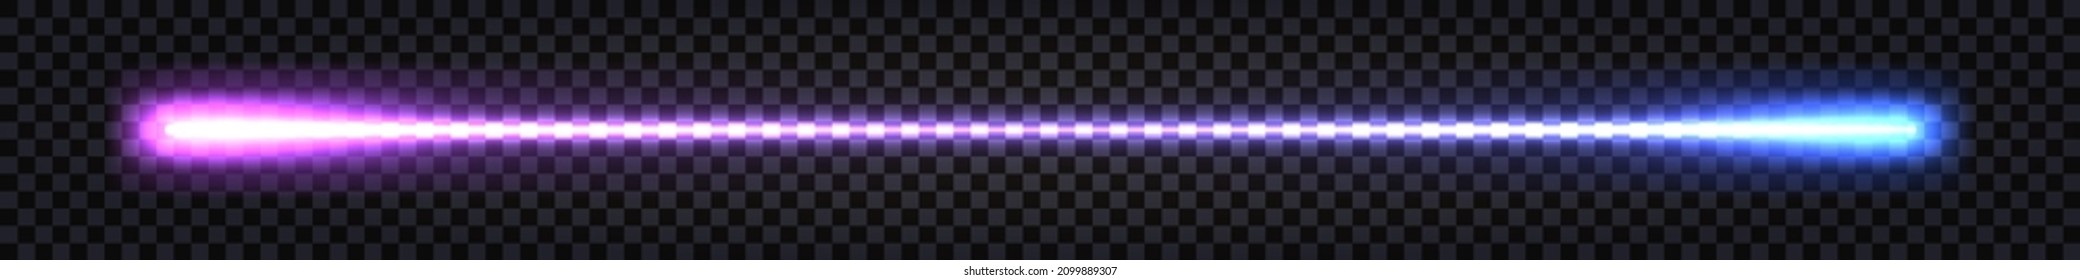 Neon laser beam, glowing streak with light thunder bolt effect. Purple and blue ray line with electric flash explosion.Techno futuristic impulse line isolated. Vector illustration